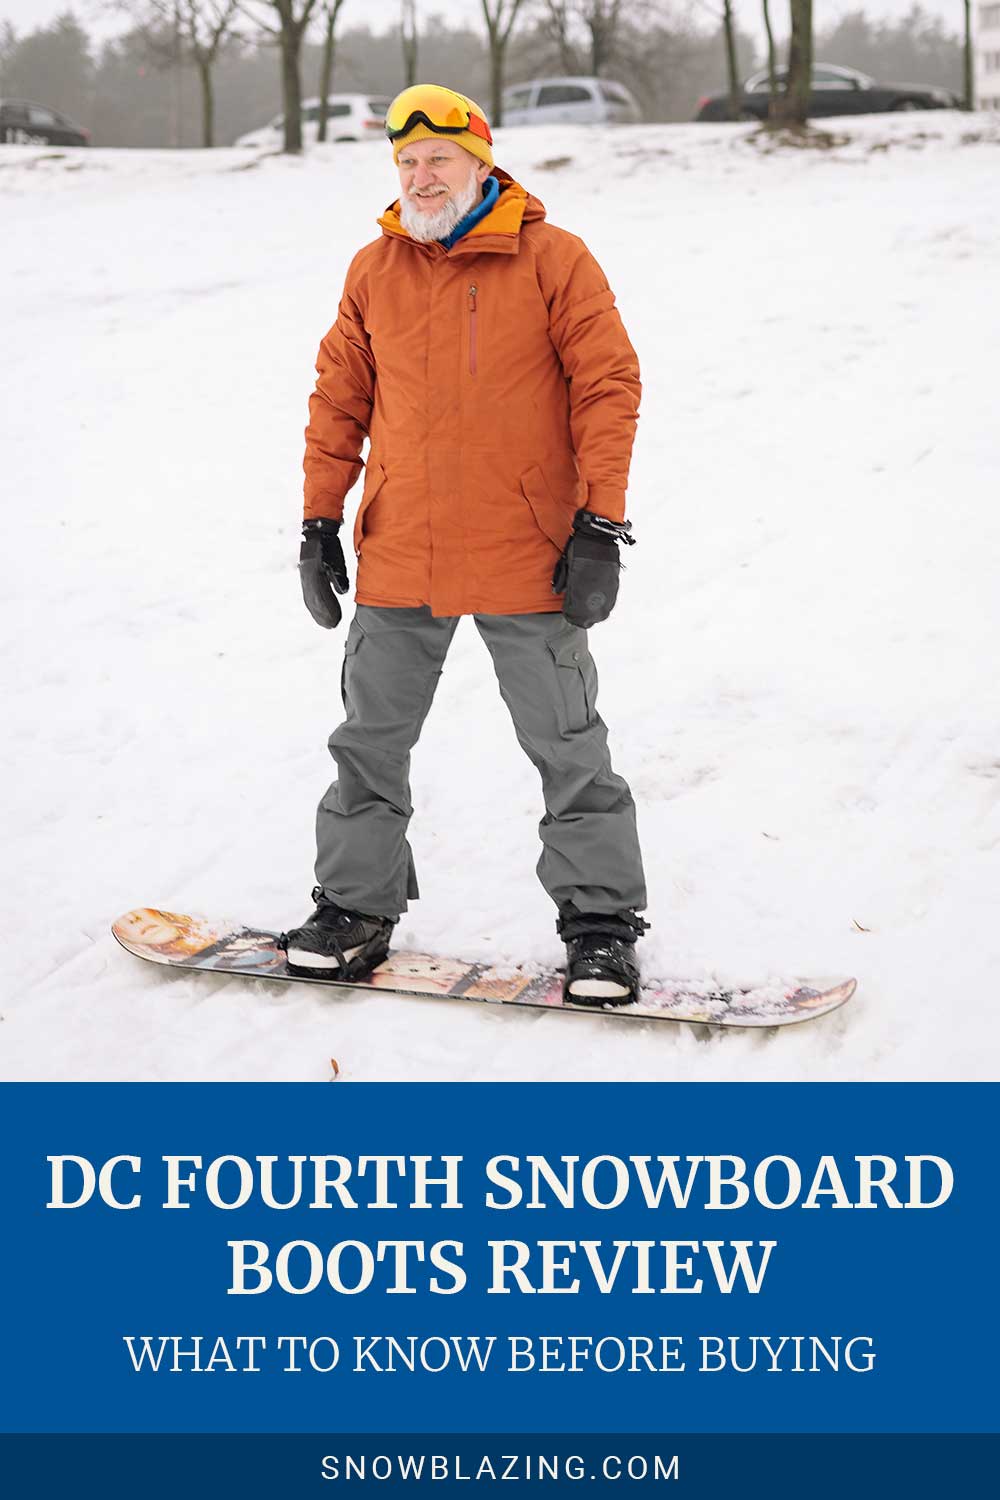 Man in orange jacket snowboarding - DC Fourth Snowboard Boots Review